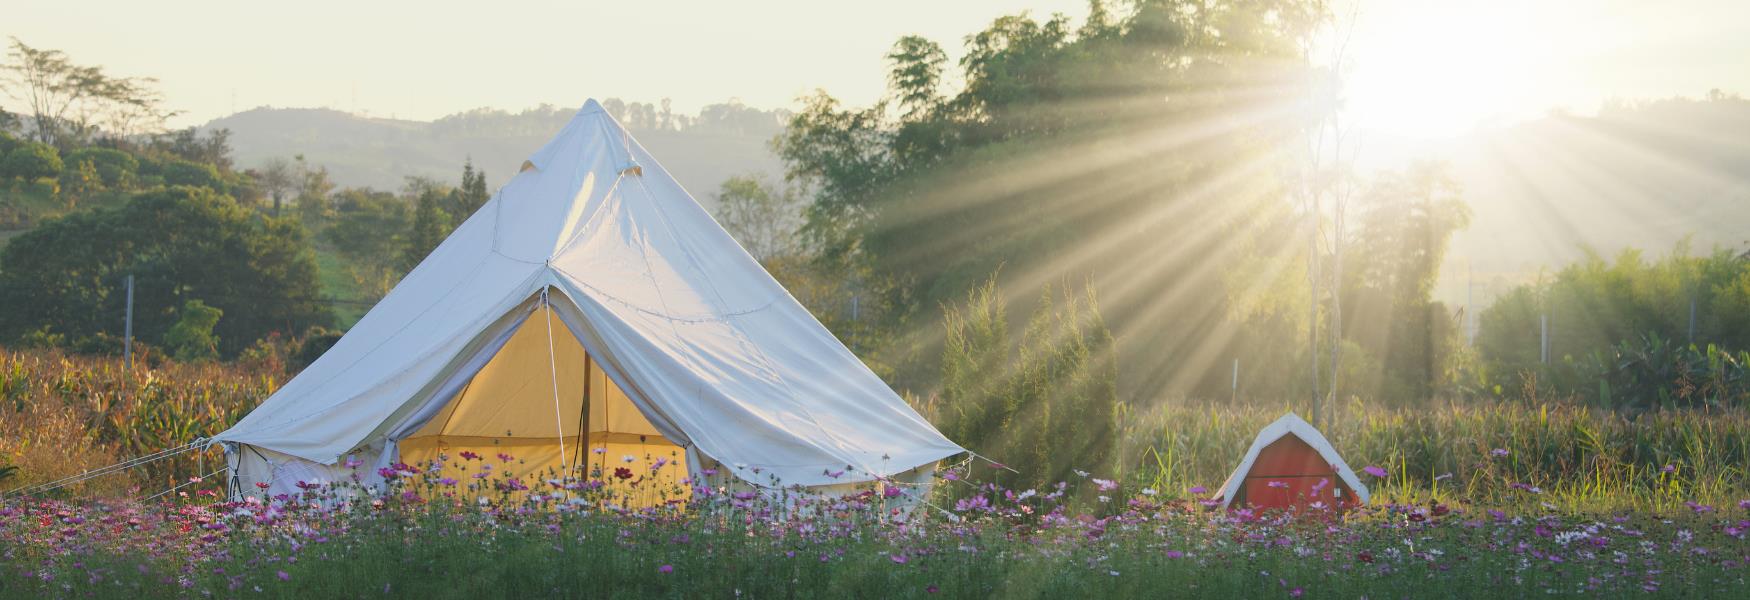 glamping in bedfordshire